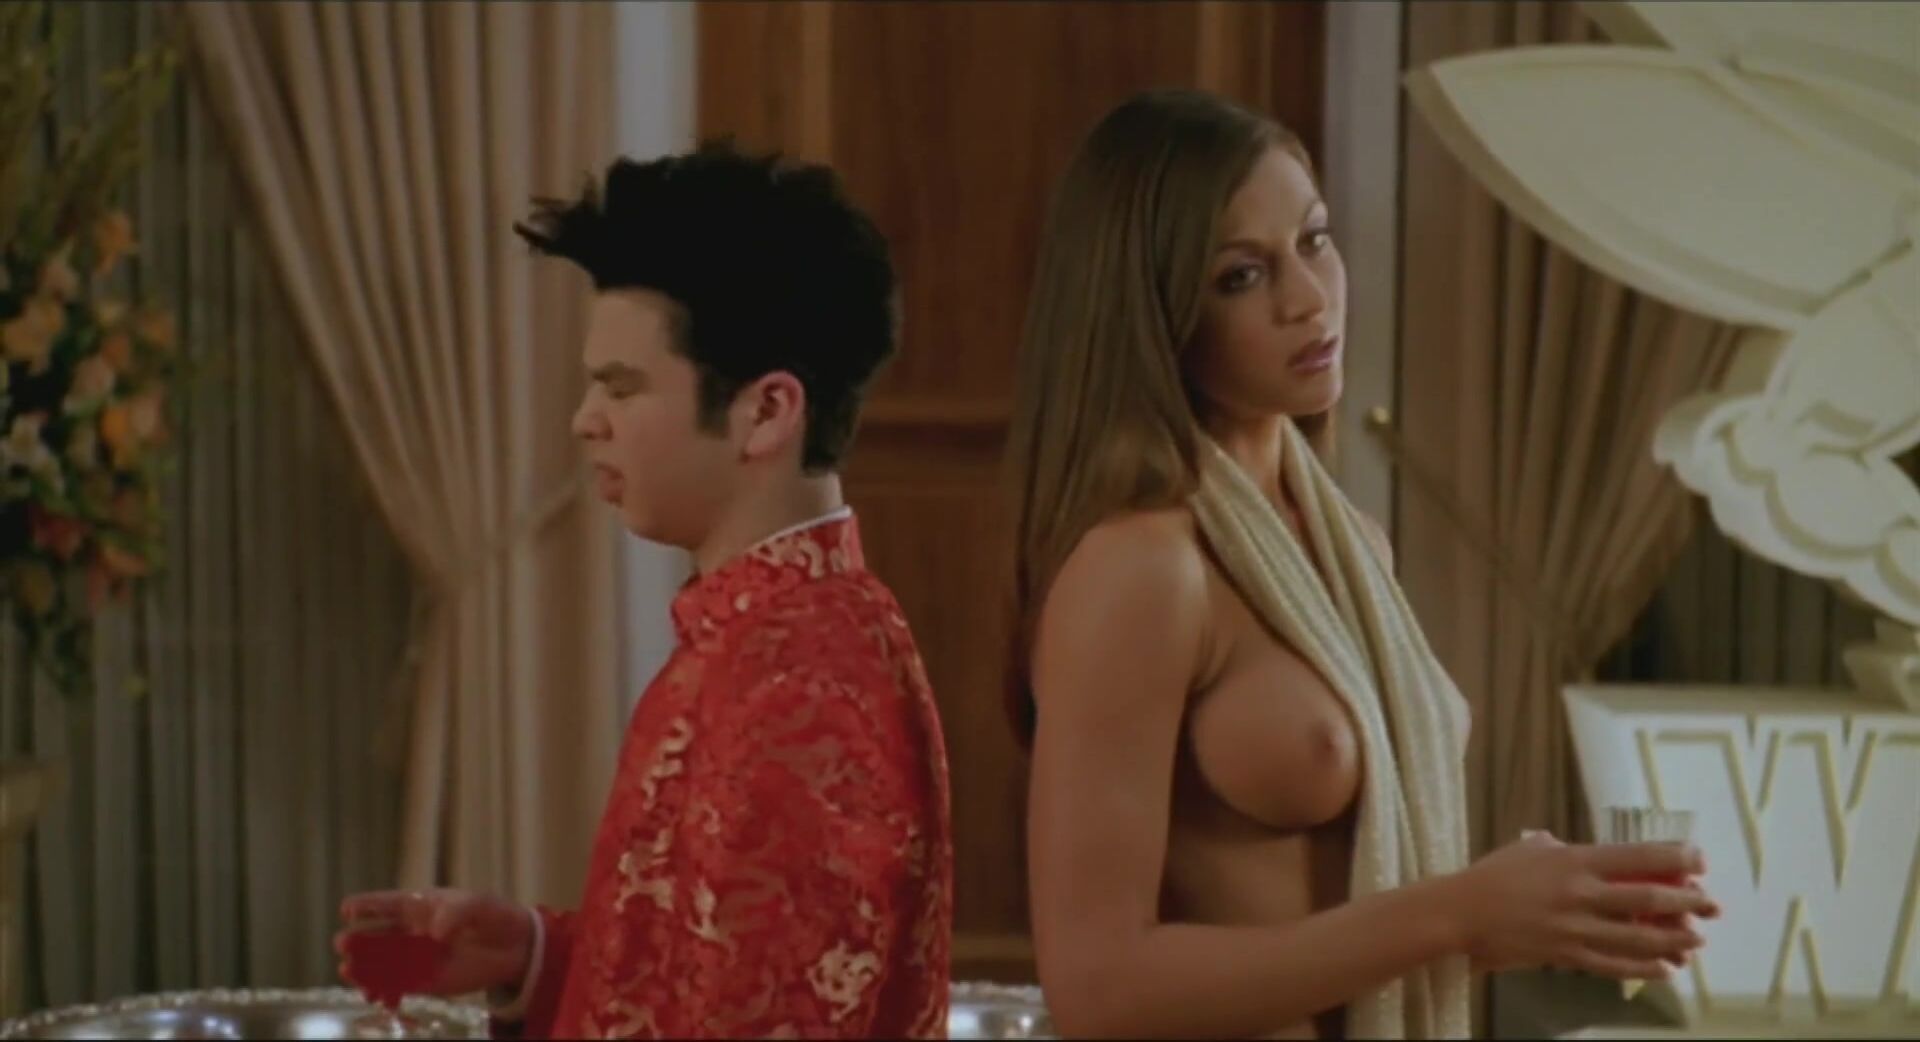 Italiano Slender Cerina Vincent dislikes wearing clothes in Not Another Teen Movie (2001) Men - 1